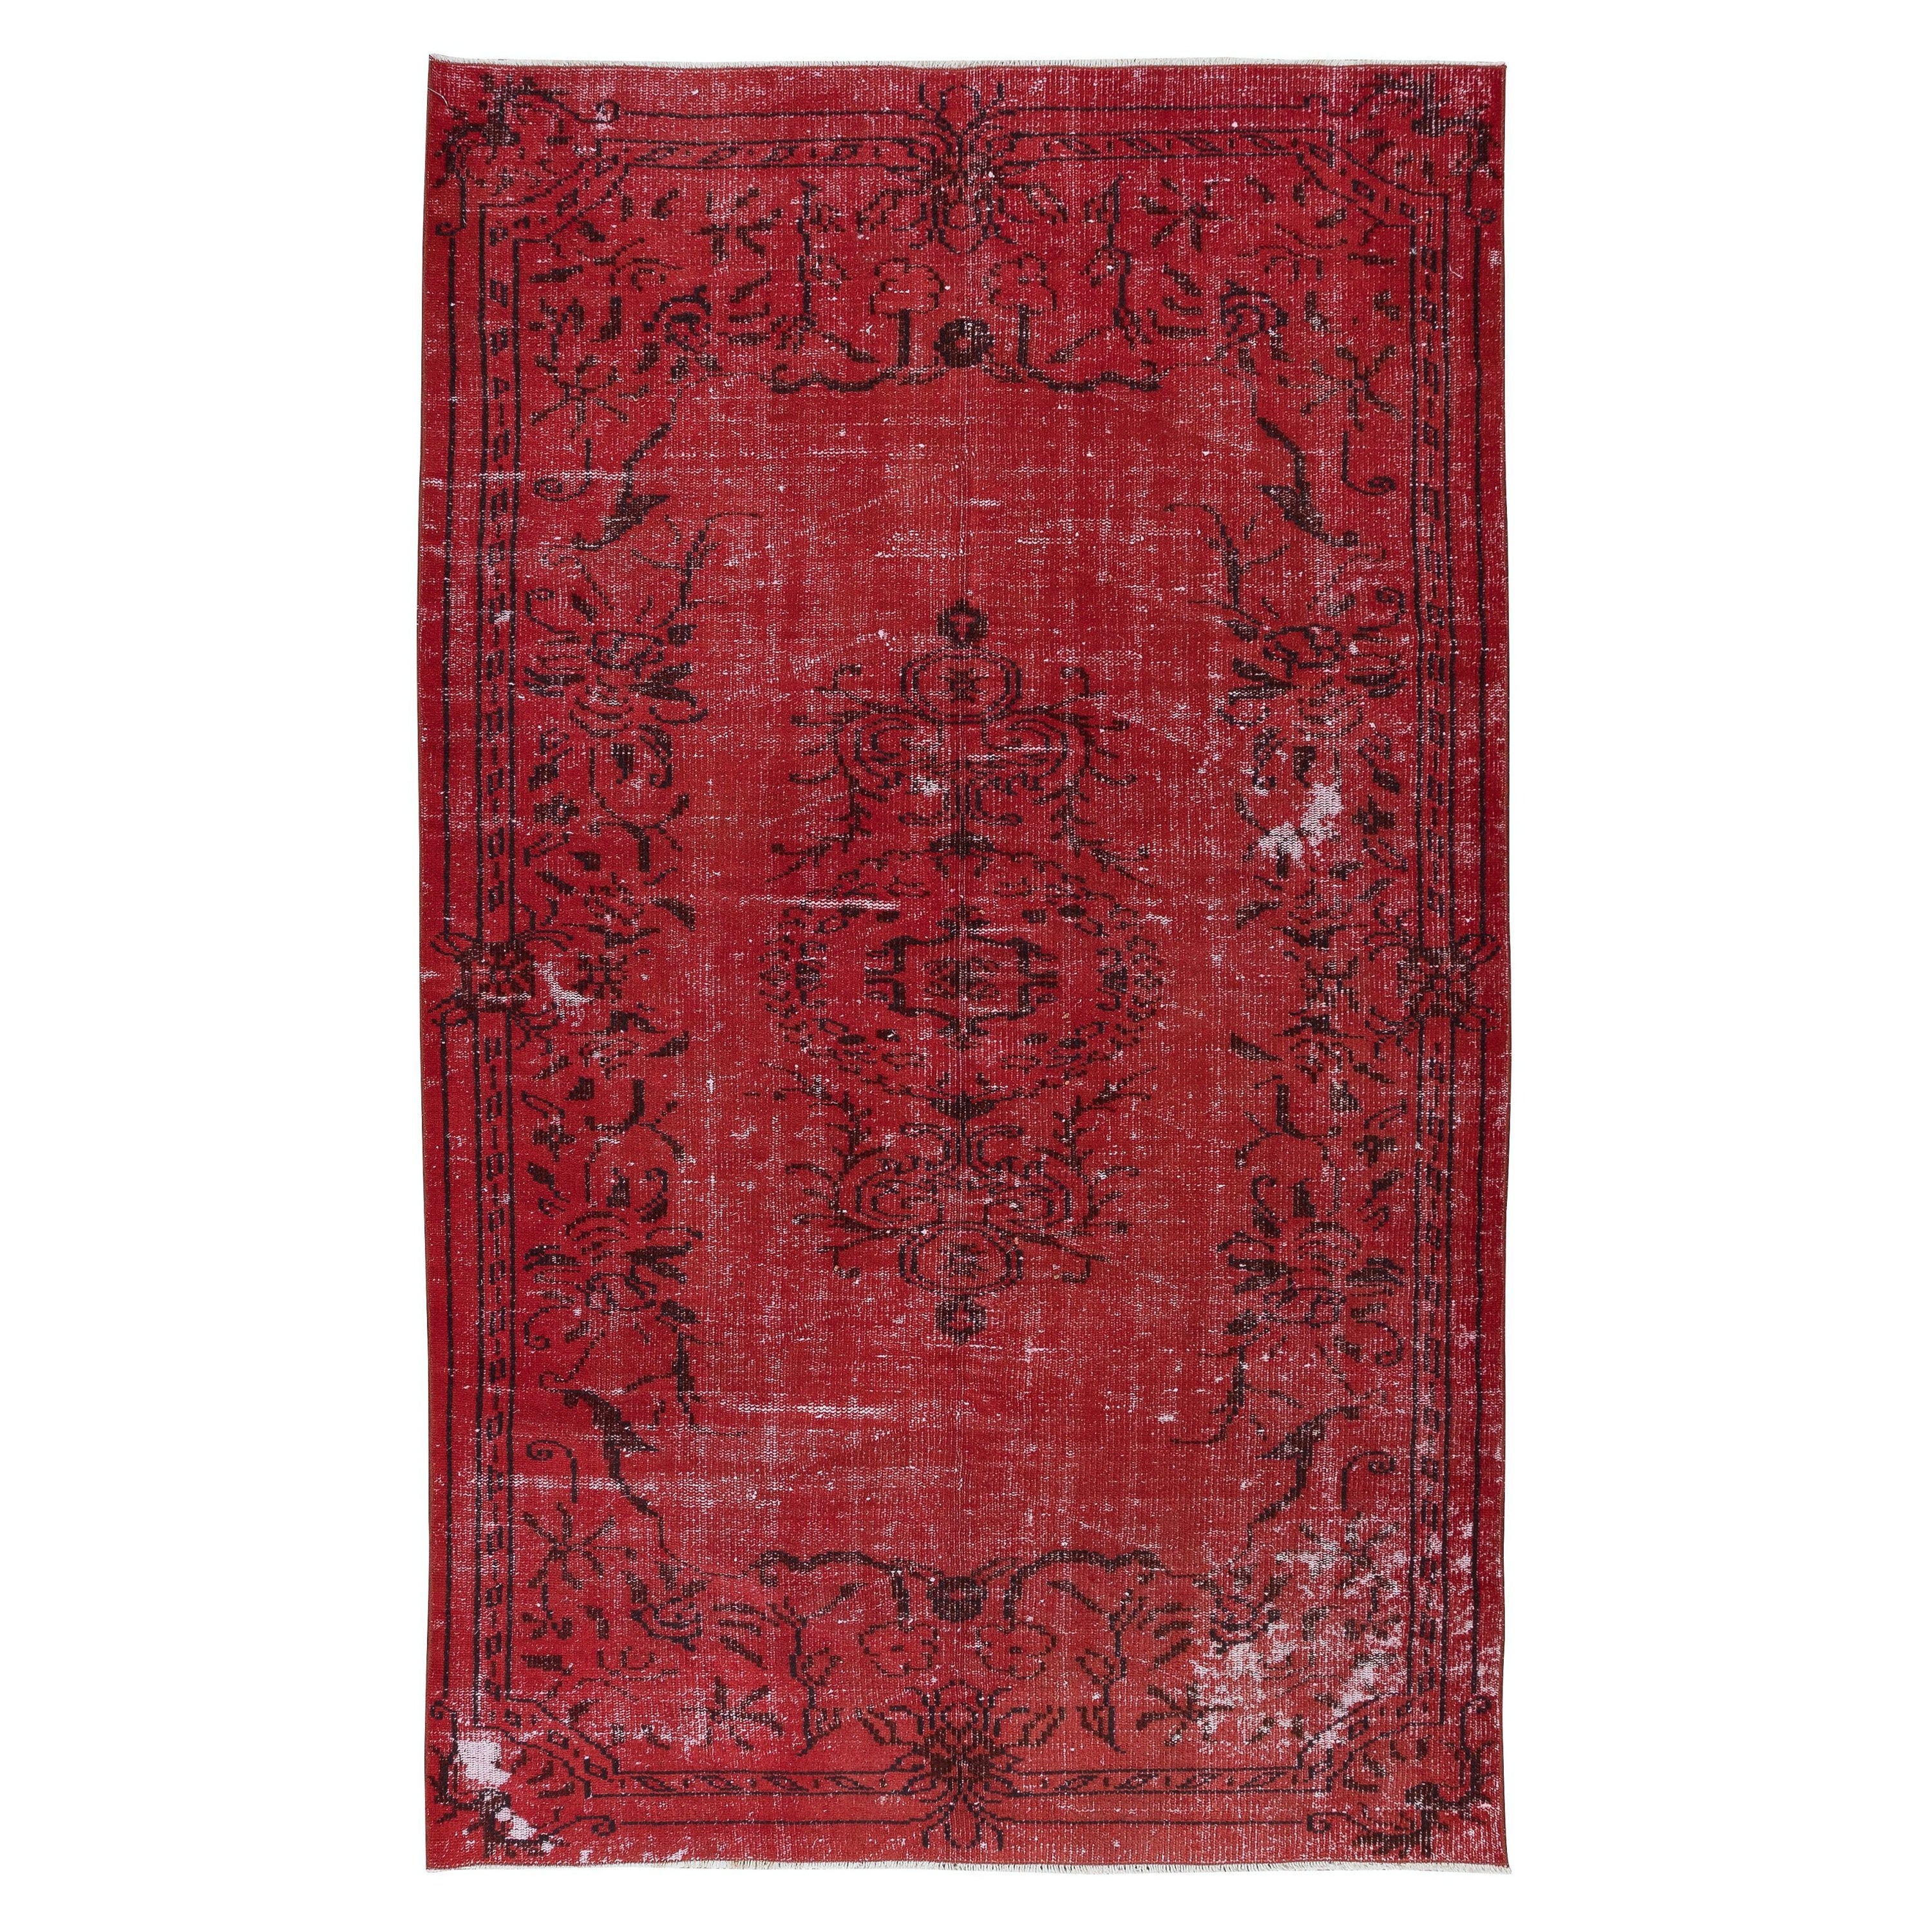 5x8 Ft Contemporary Wool Area Rug in Burgundy Red, Hand-Knotted in Turkey